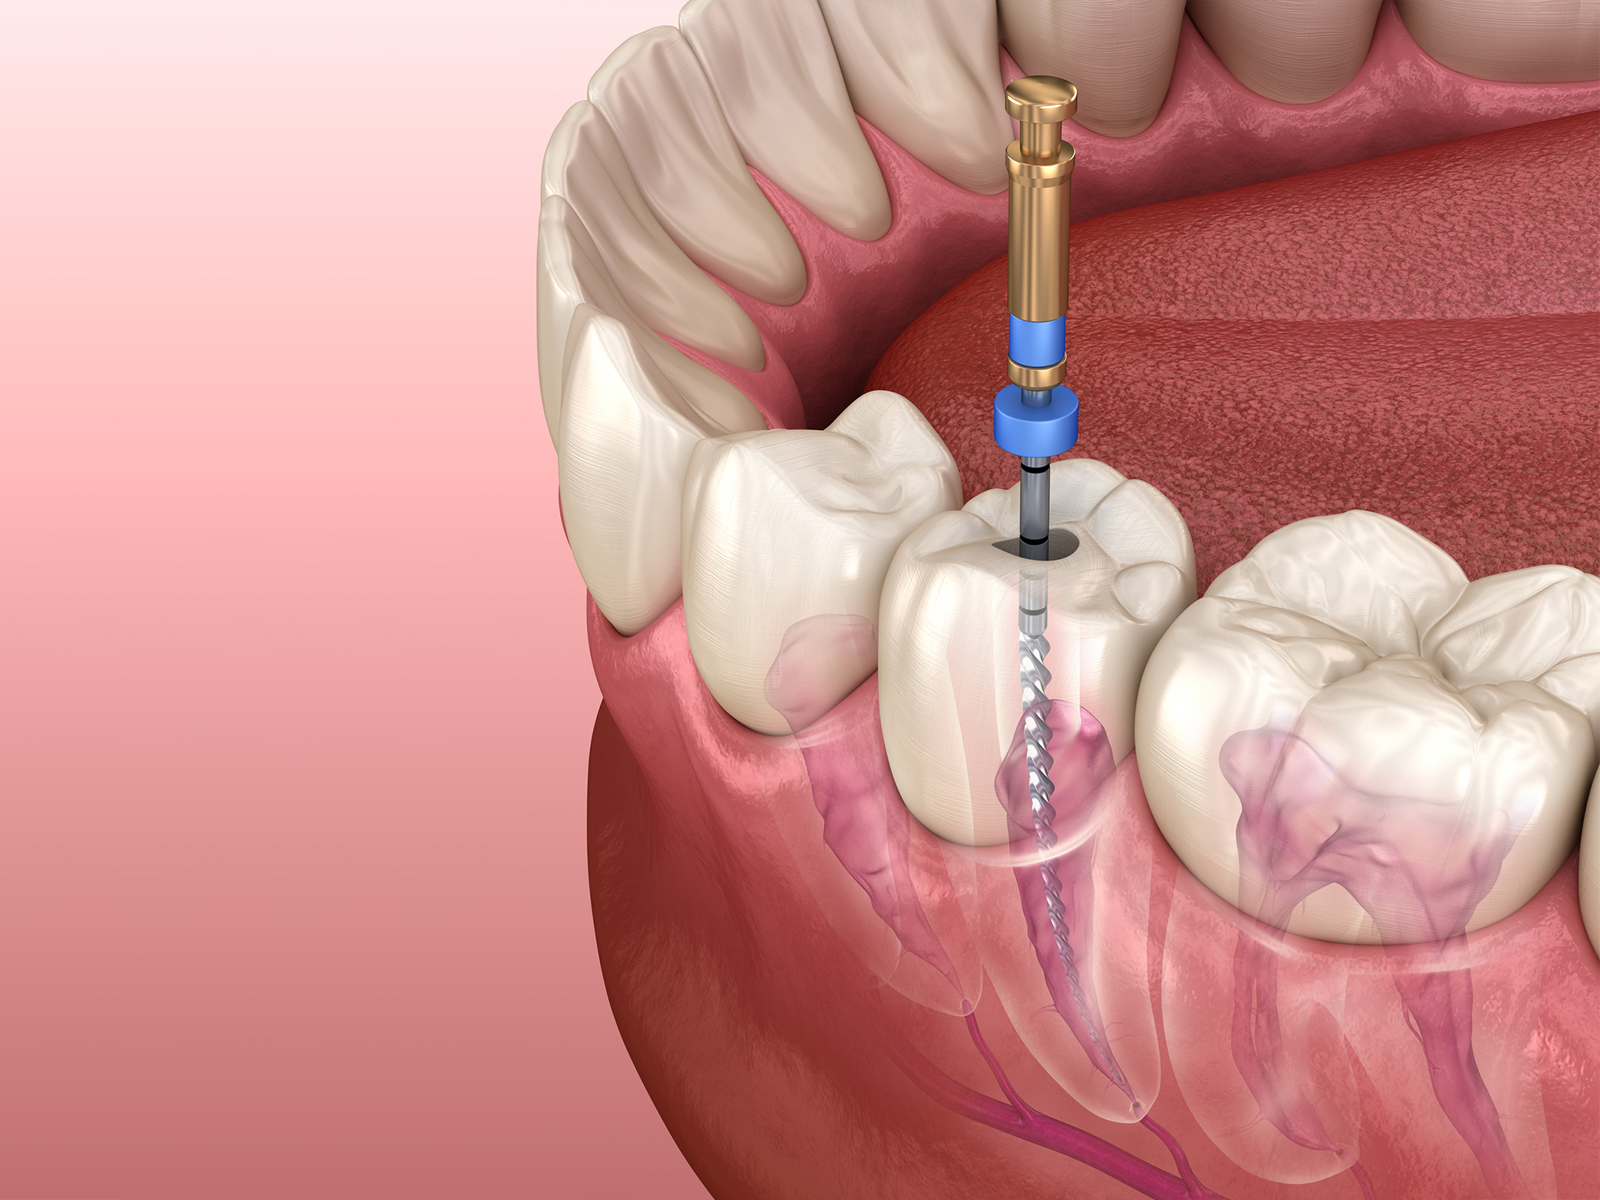 Will antibiotics cure an infected root canal?